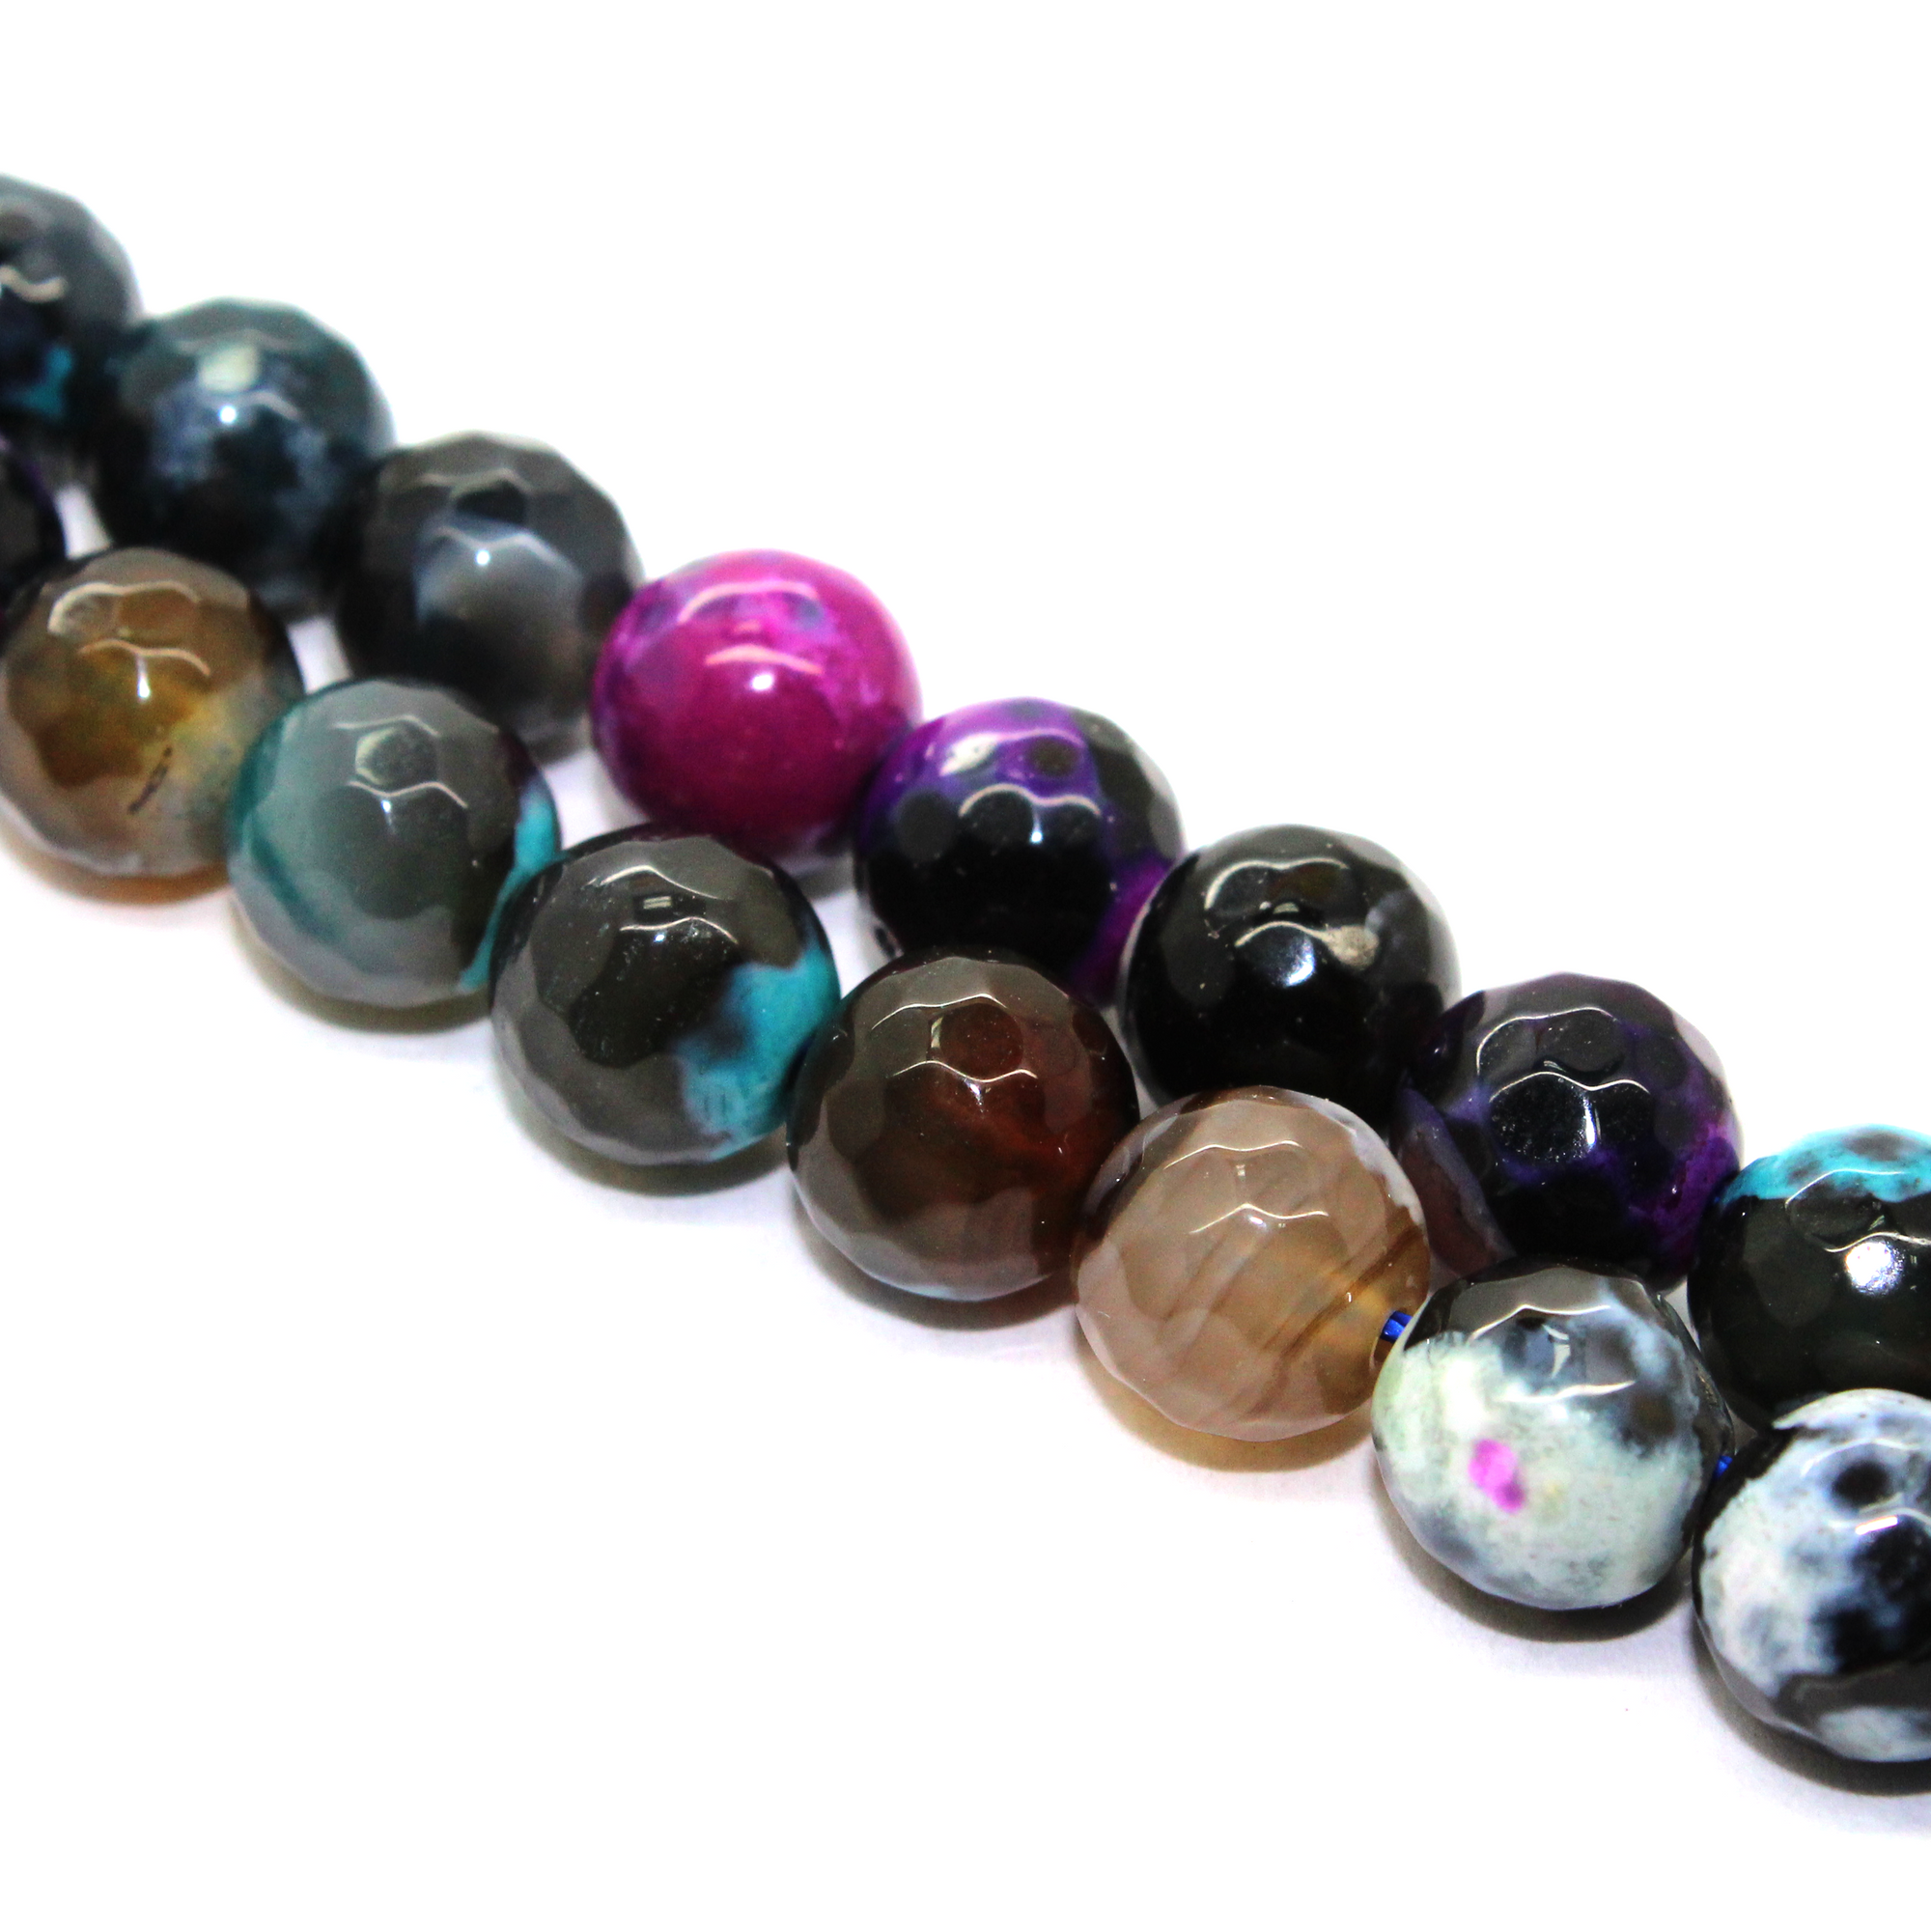 Agate Faceted - Multi color Fire Agate, Semi-Precious Stone, 6mm, 60 pcs per strand - Butterfly Beads